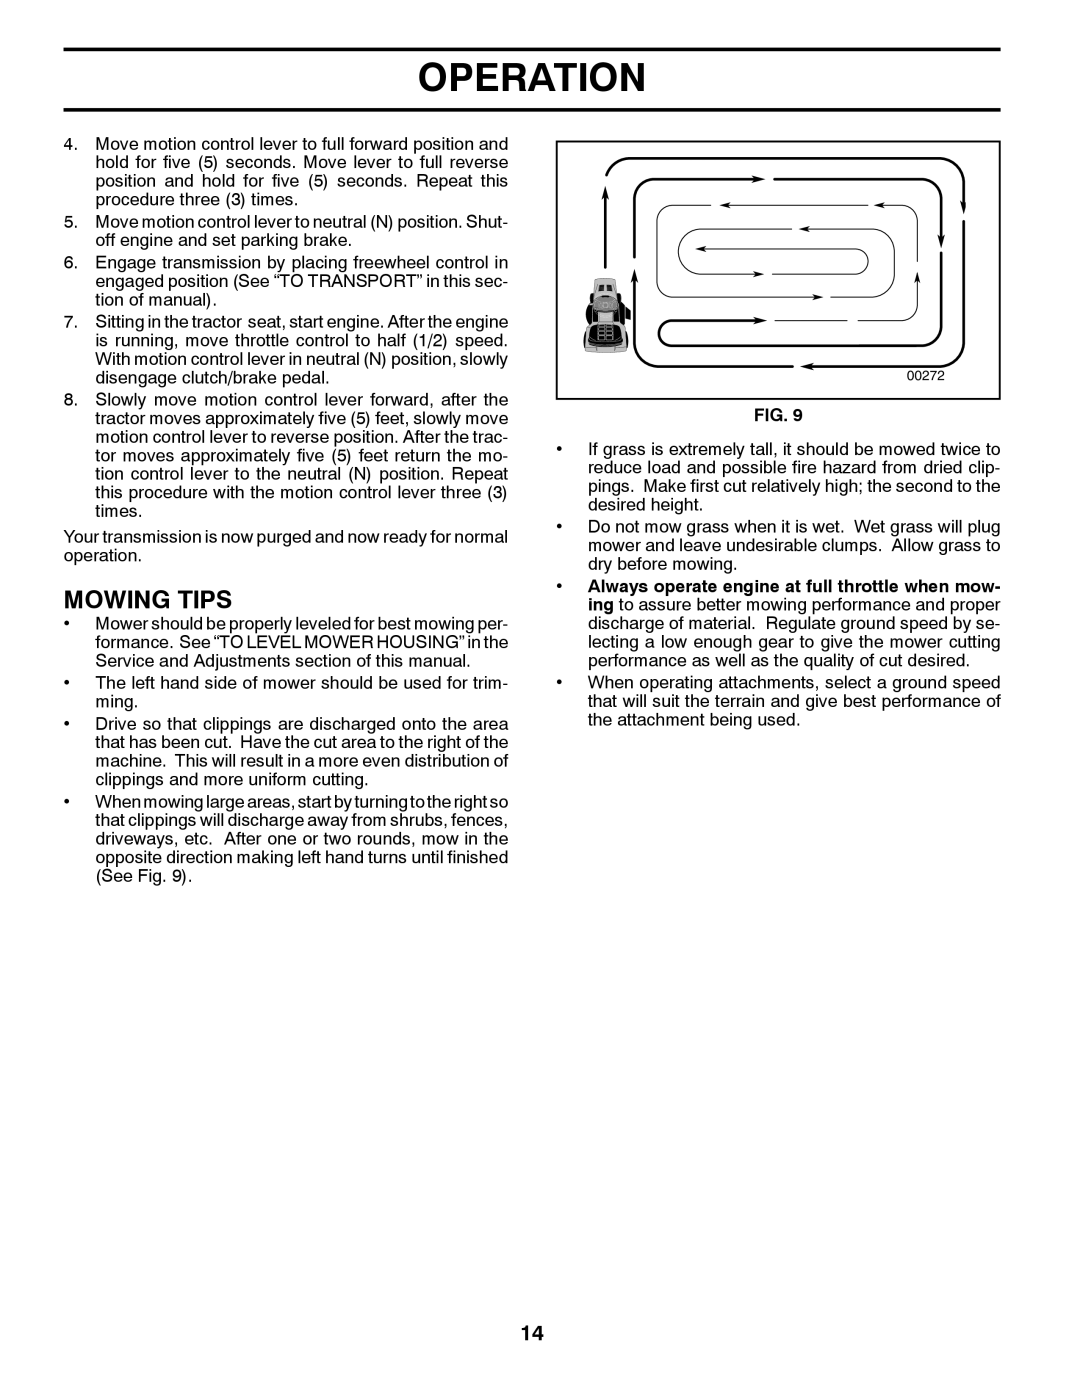 Husqvarna LTH1797 owner manual Mowing Tips, Operation 